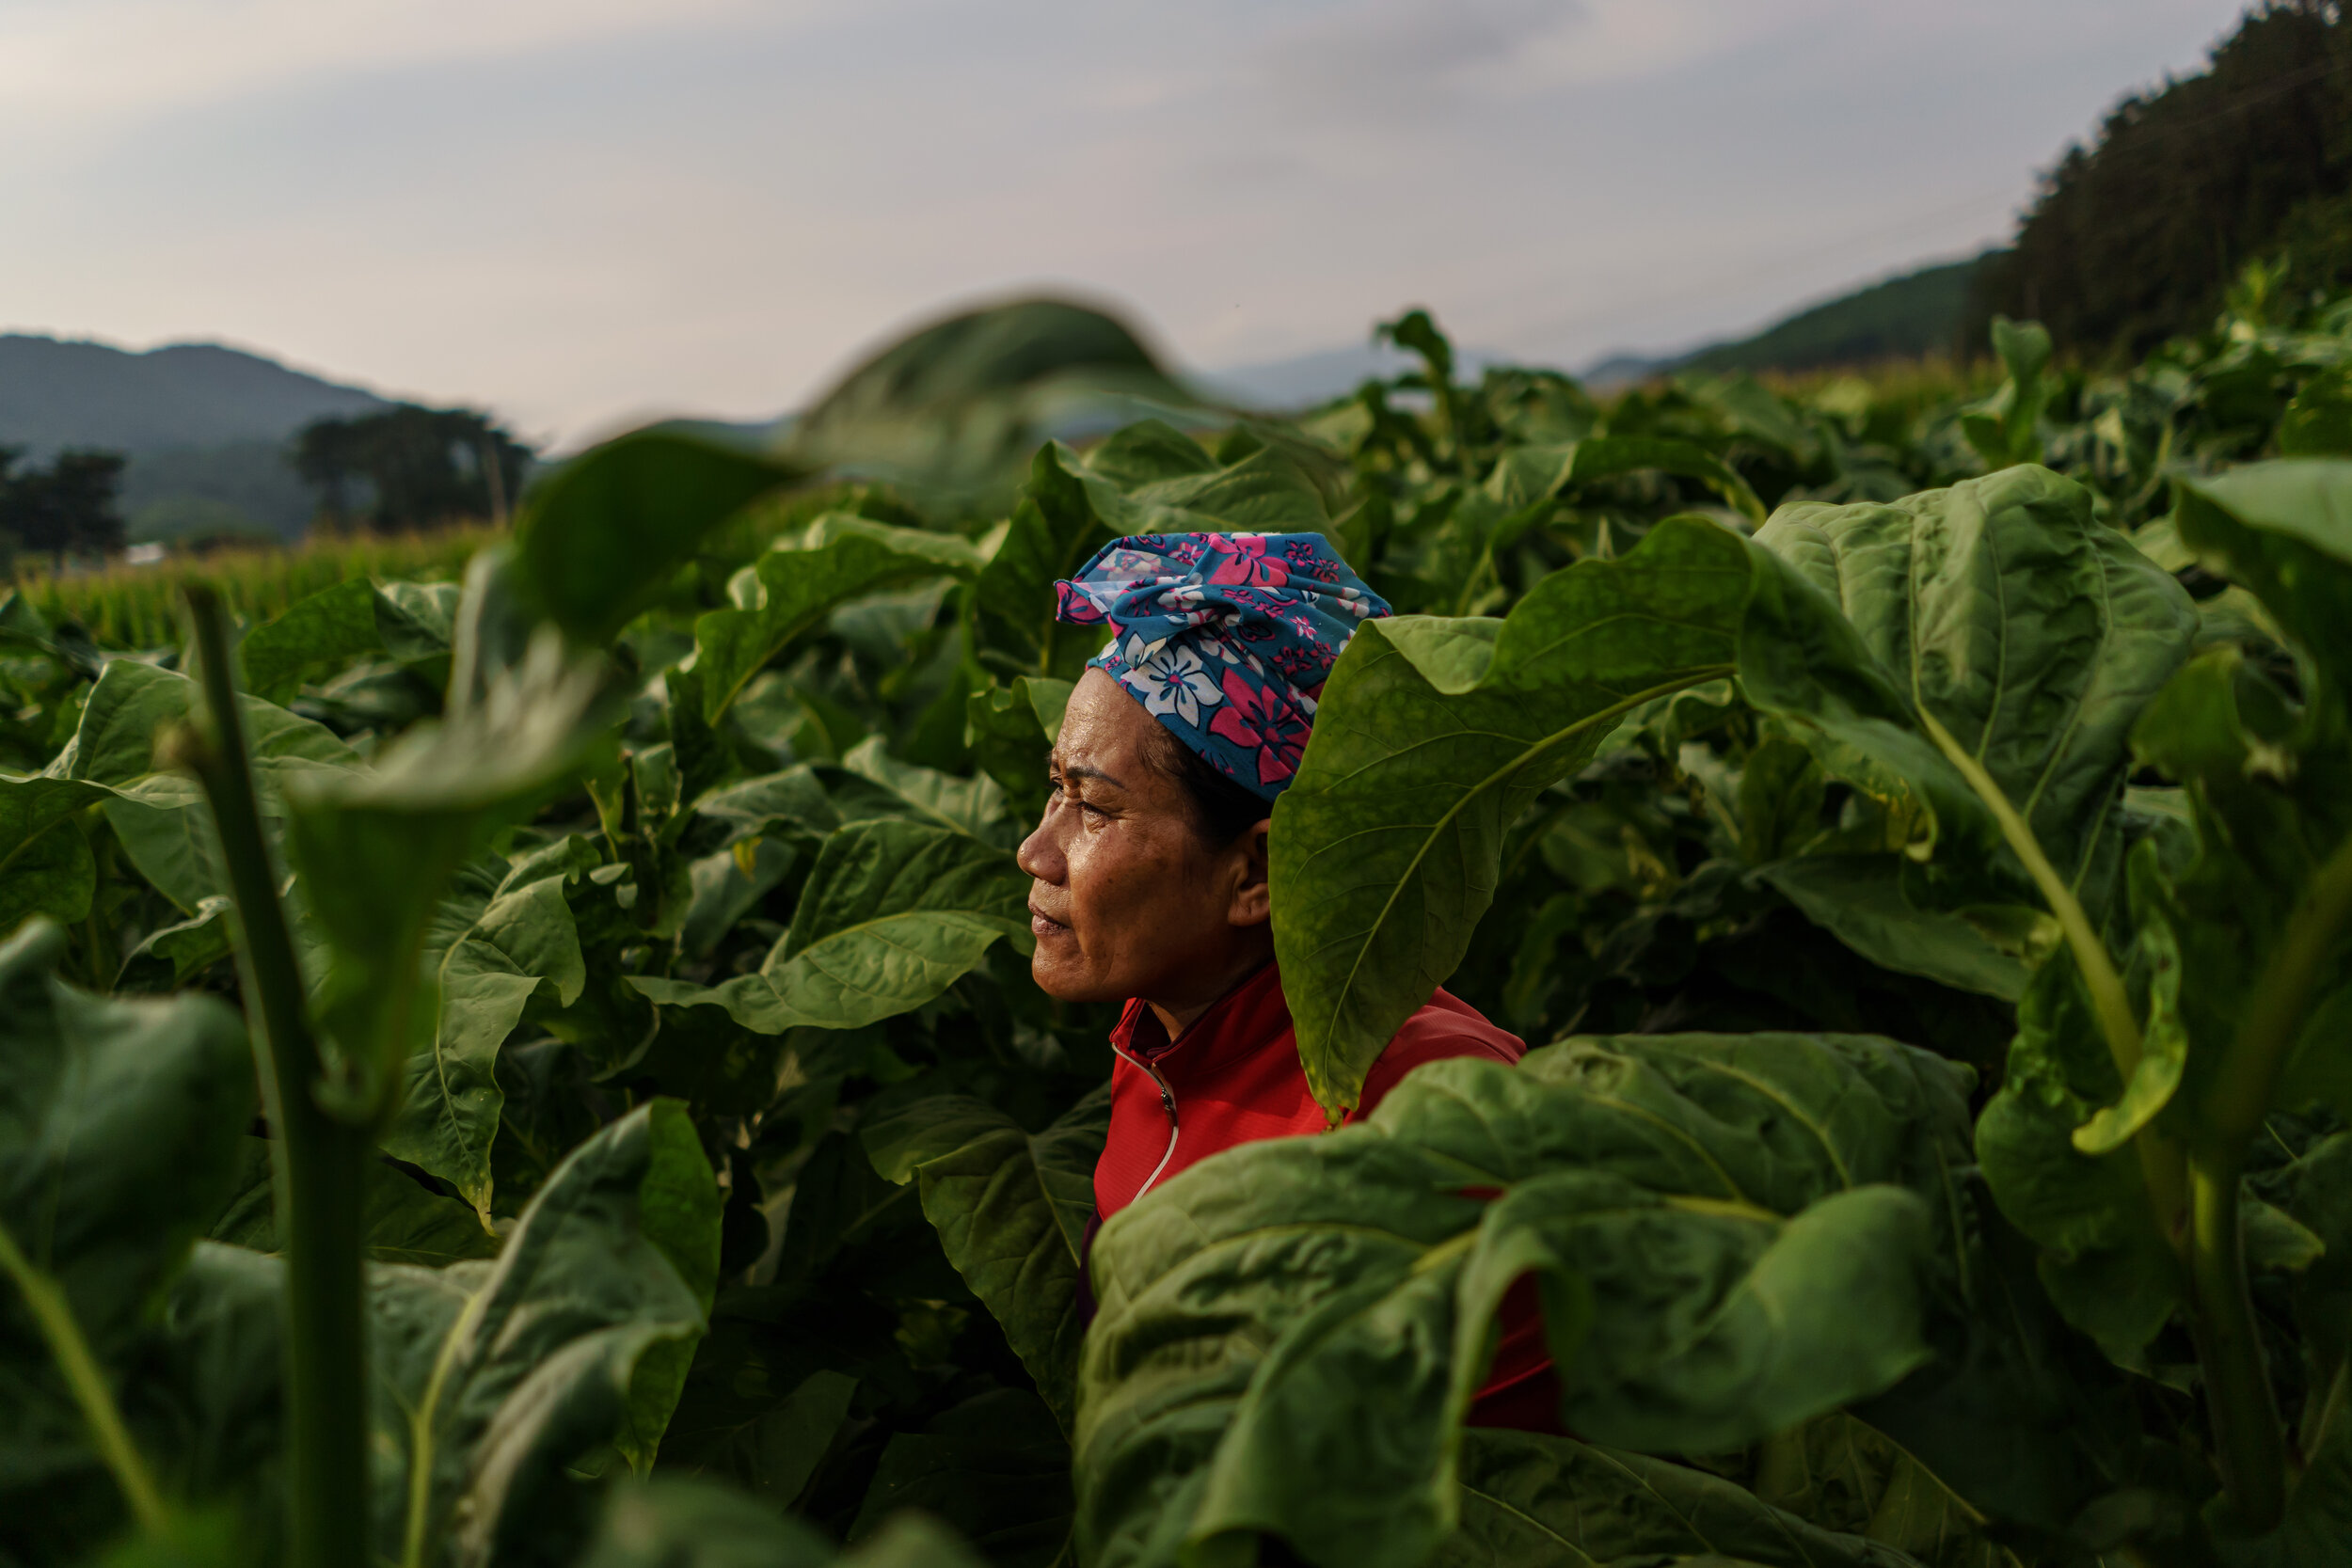  Jarunee Phonsrikaew looks off into the distance as she takes a moment to herself while picking tobacco leaves on a farm in Bokheung-Myeon, South Korea, on July 8, 2020. be known in Thai as the phi noi, or little ghost people entering South Korea in 